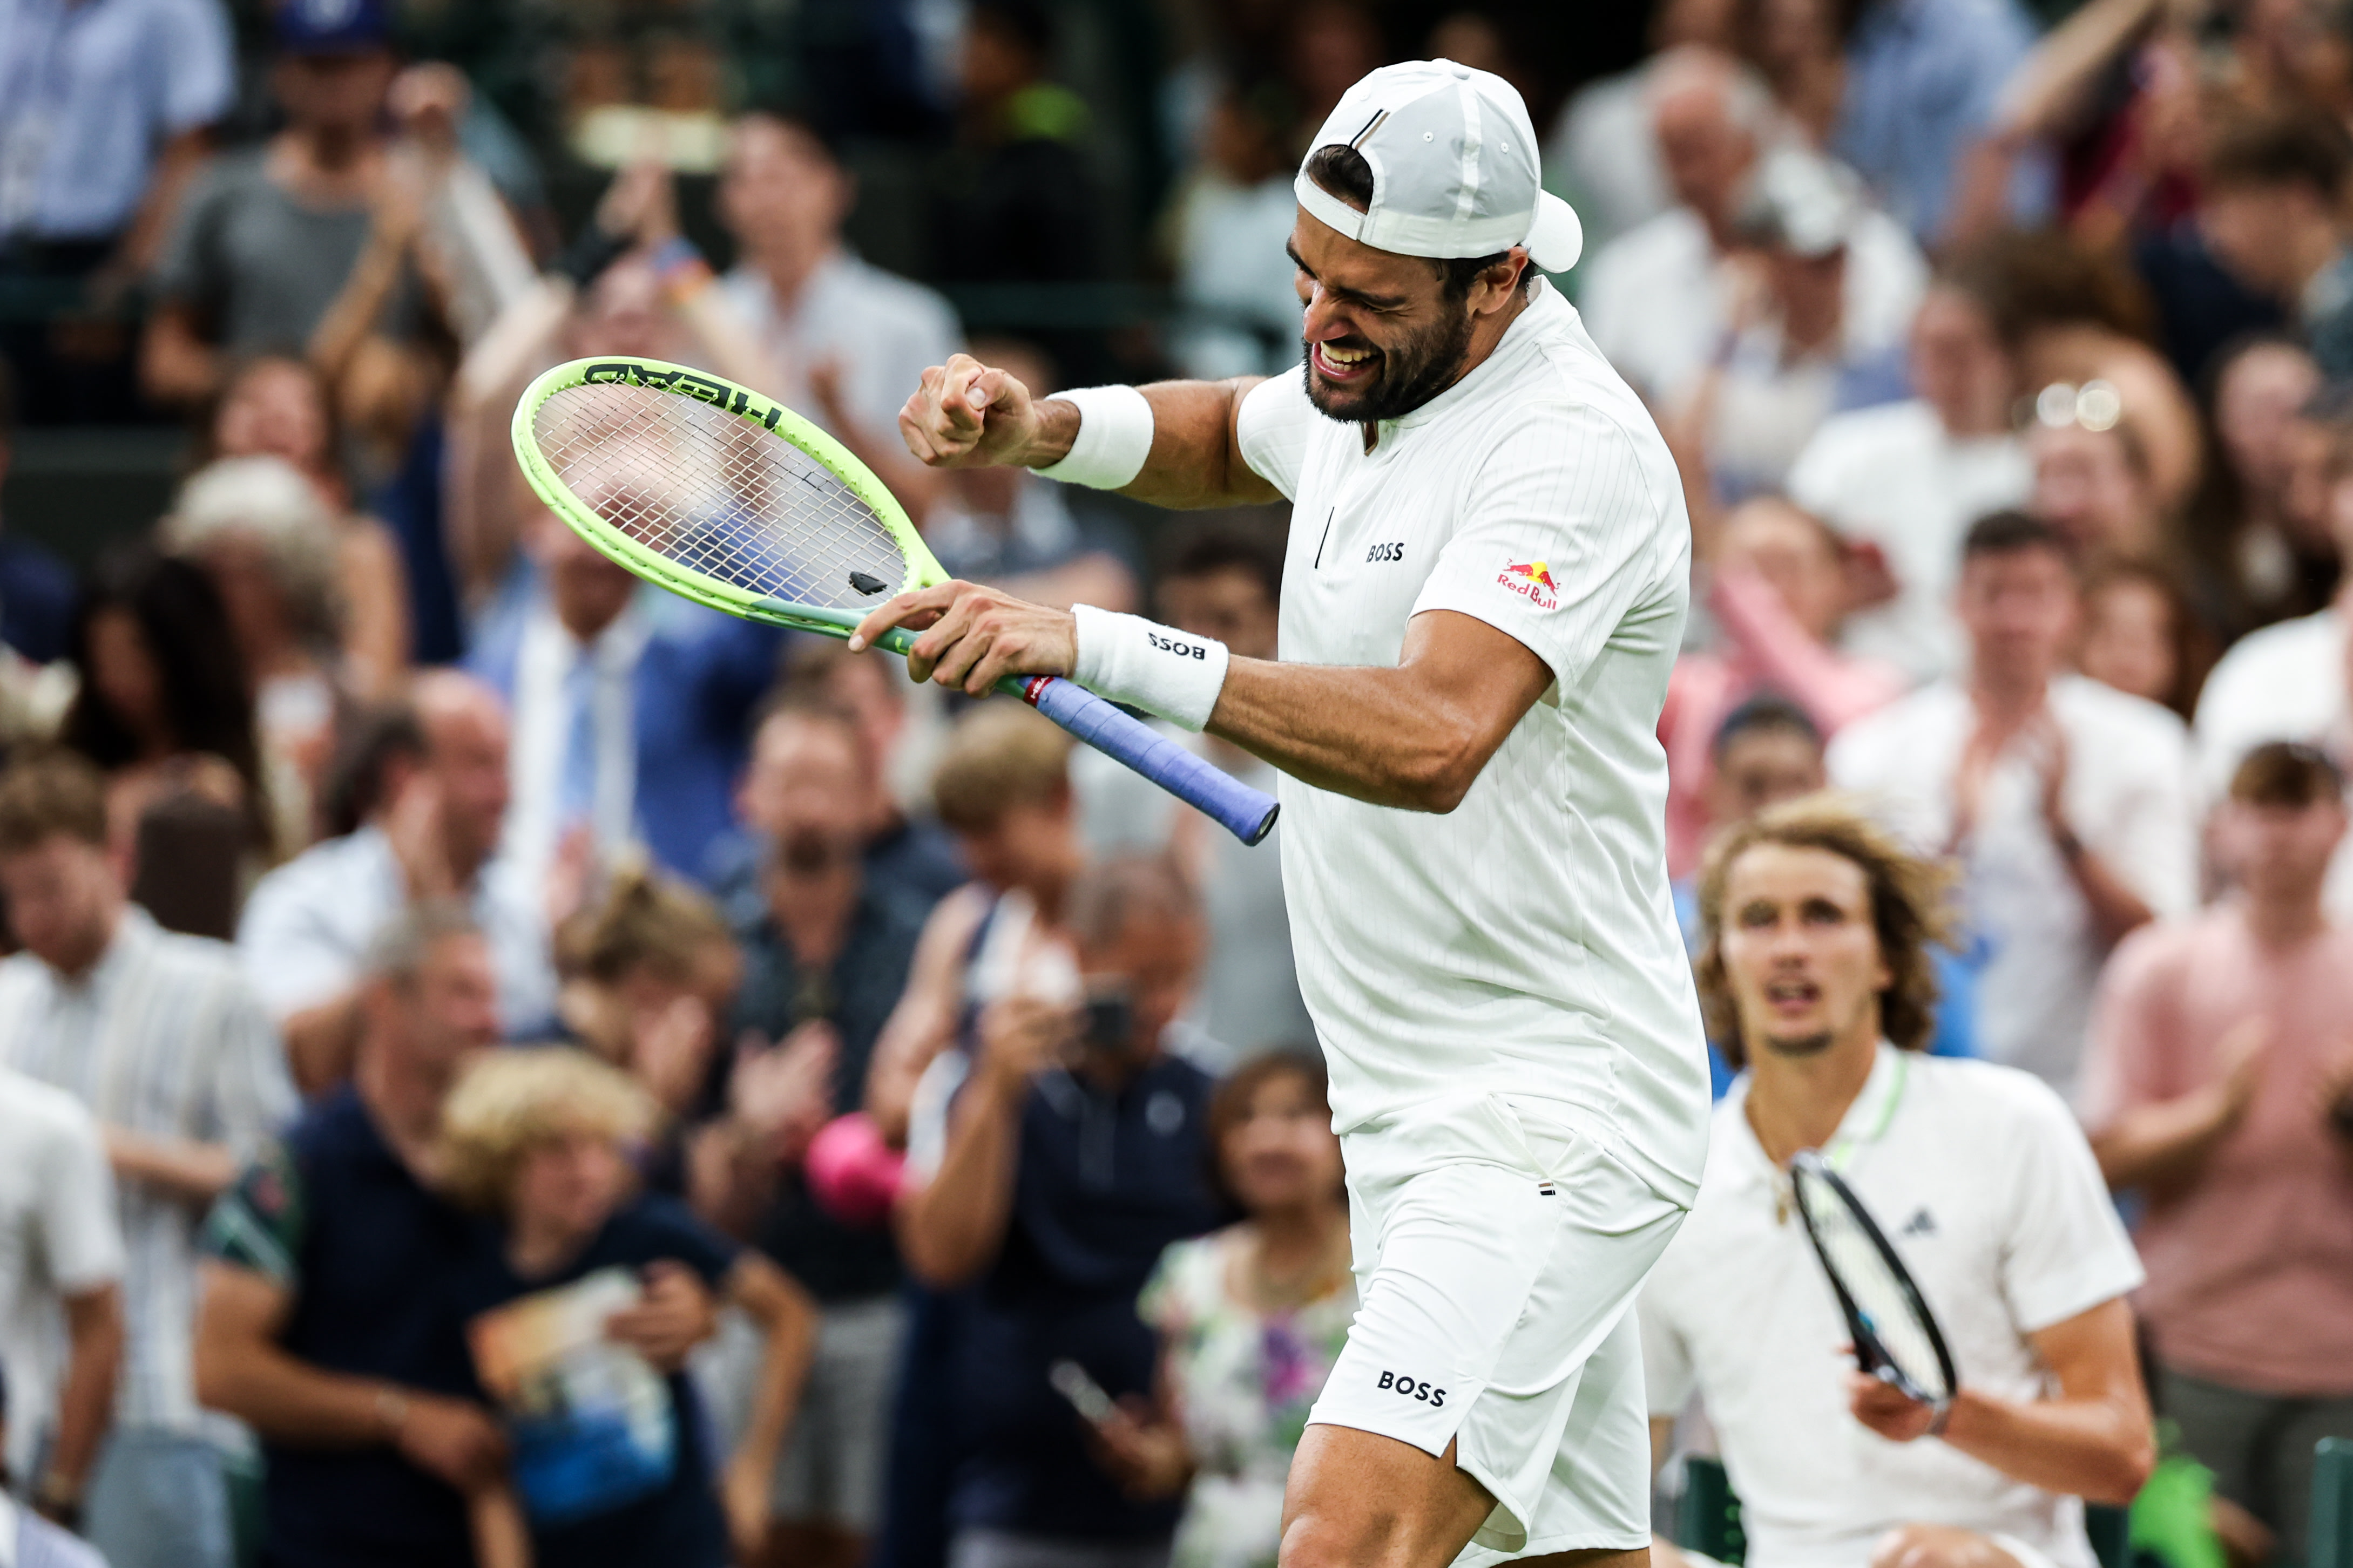 Quote of the Day Matteo Berrettini would have “signed with my blood” to be in Wimbledon fourth round